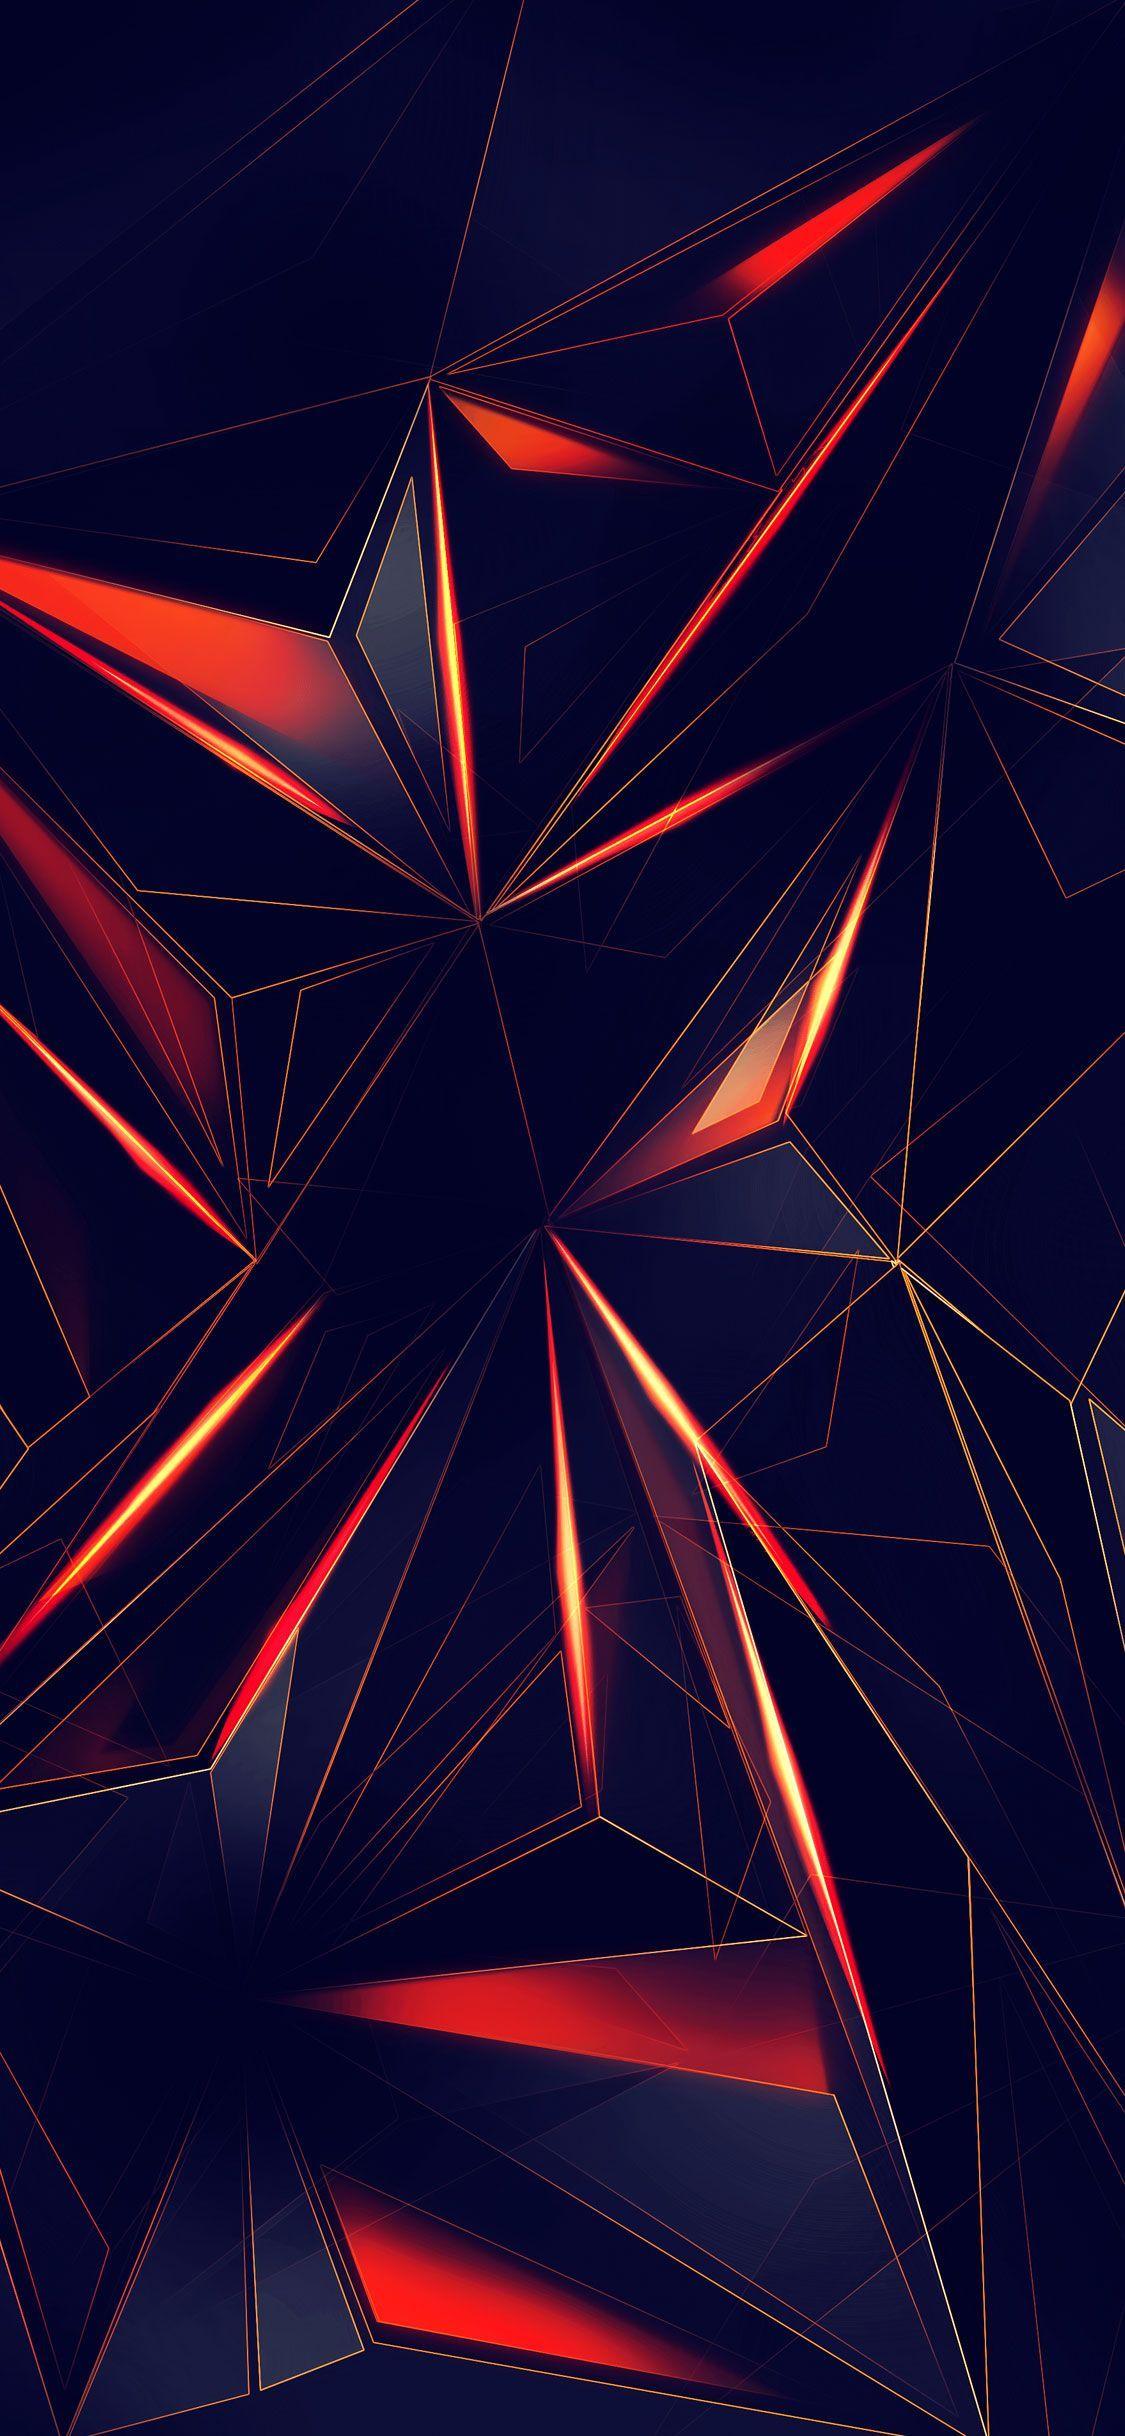 Abstract Design Wallpapers